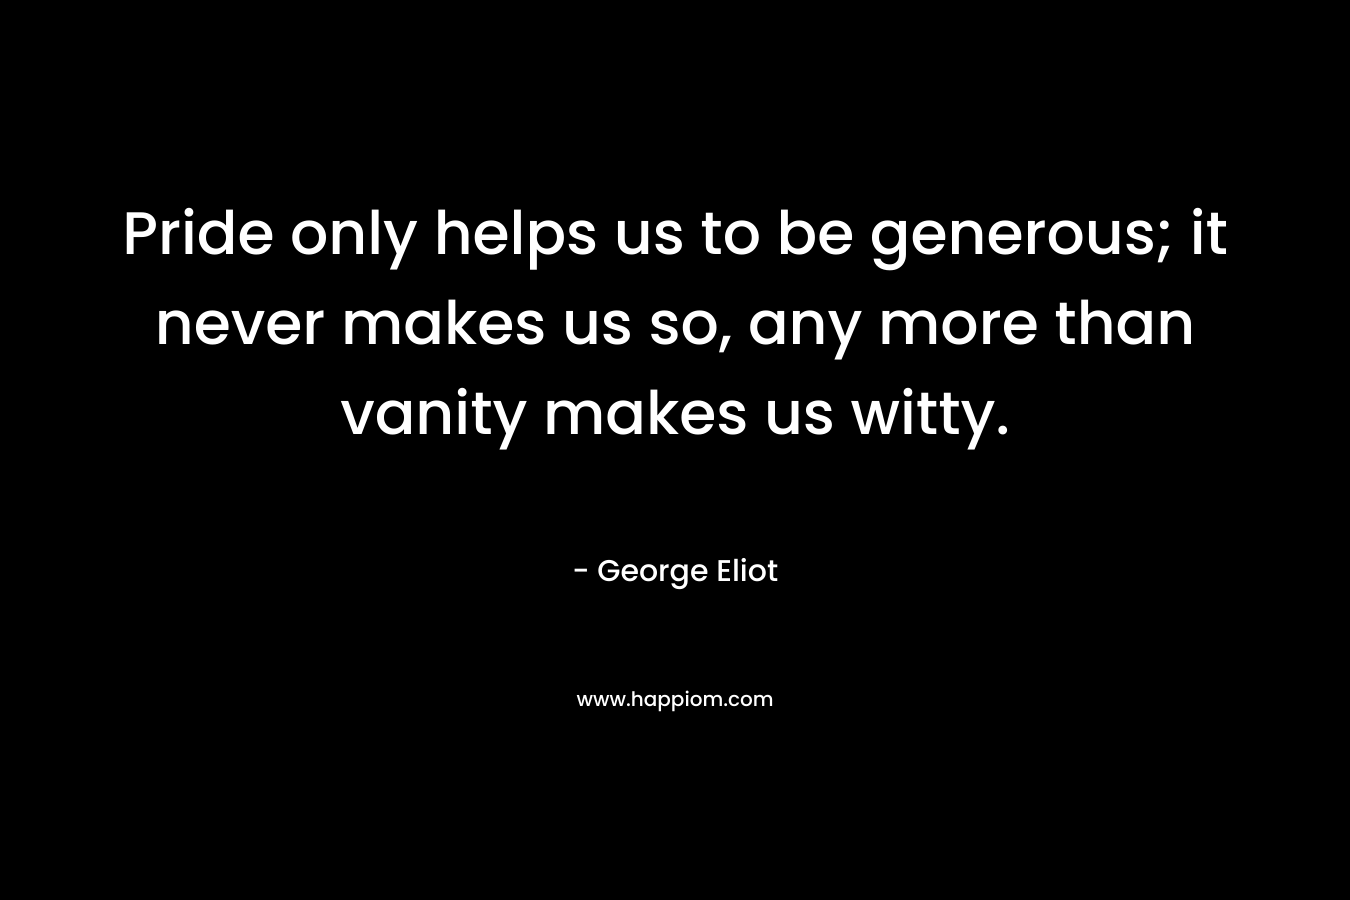 Pride only helps us to be generous; it never makes us so, any more than vanity makes us witty. – George Eliot